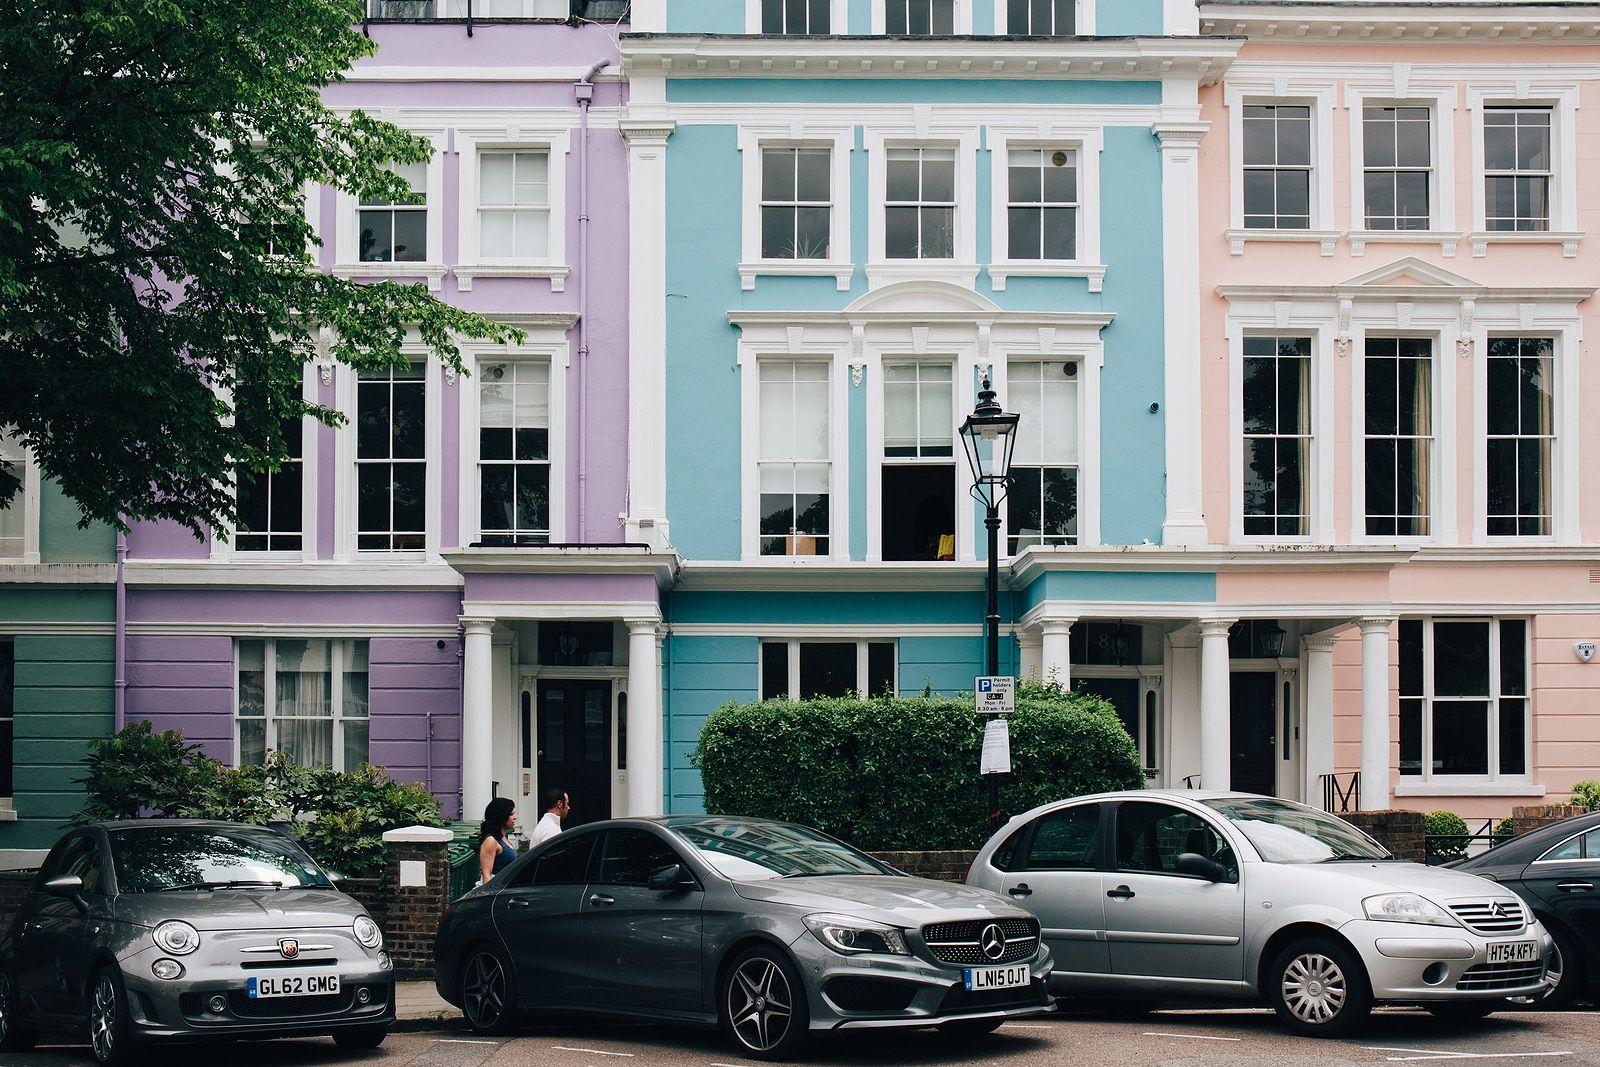 What is it like to live in Primrose Hill?